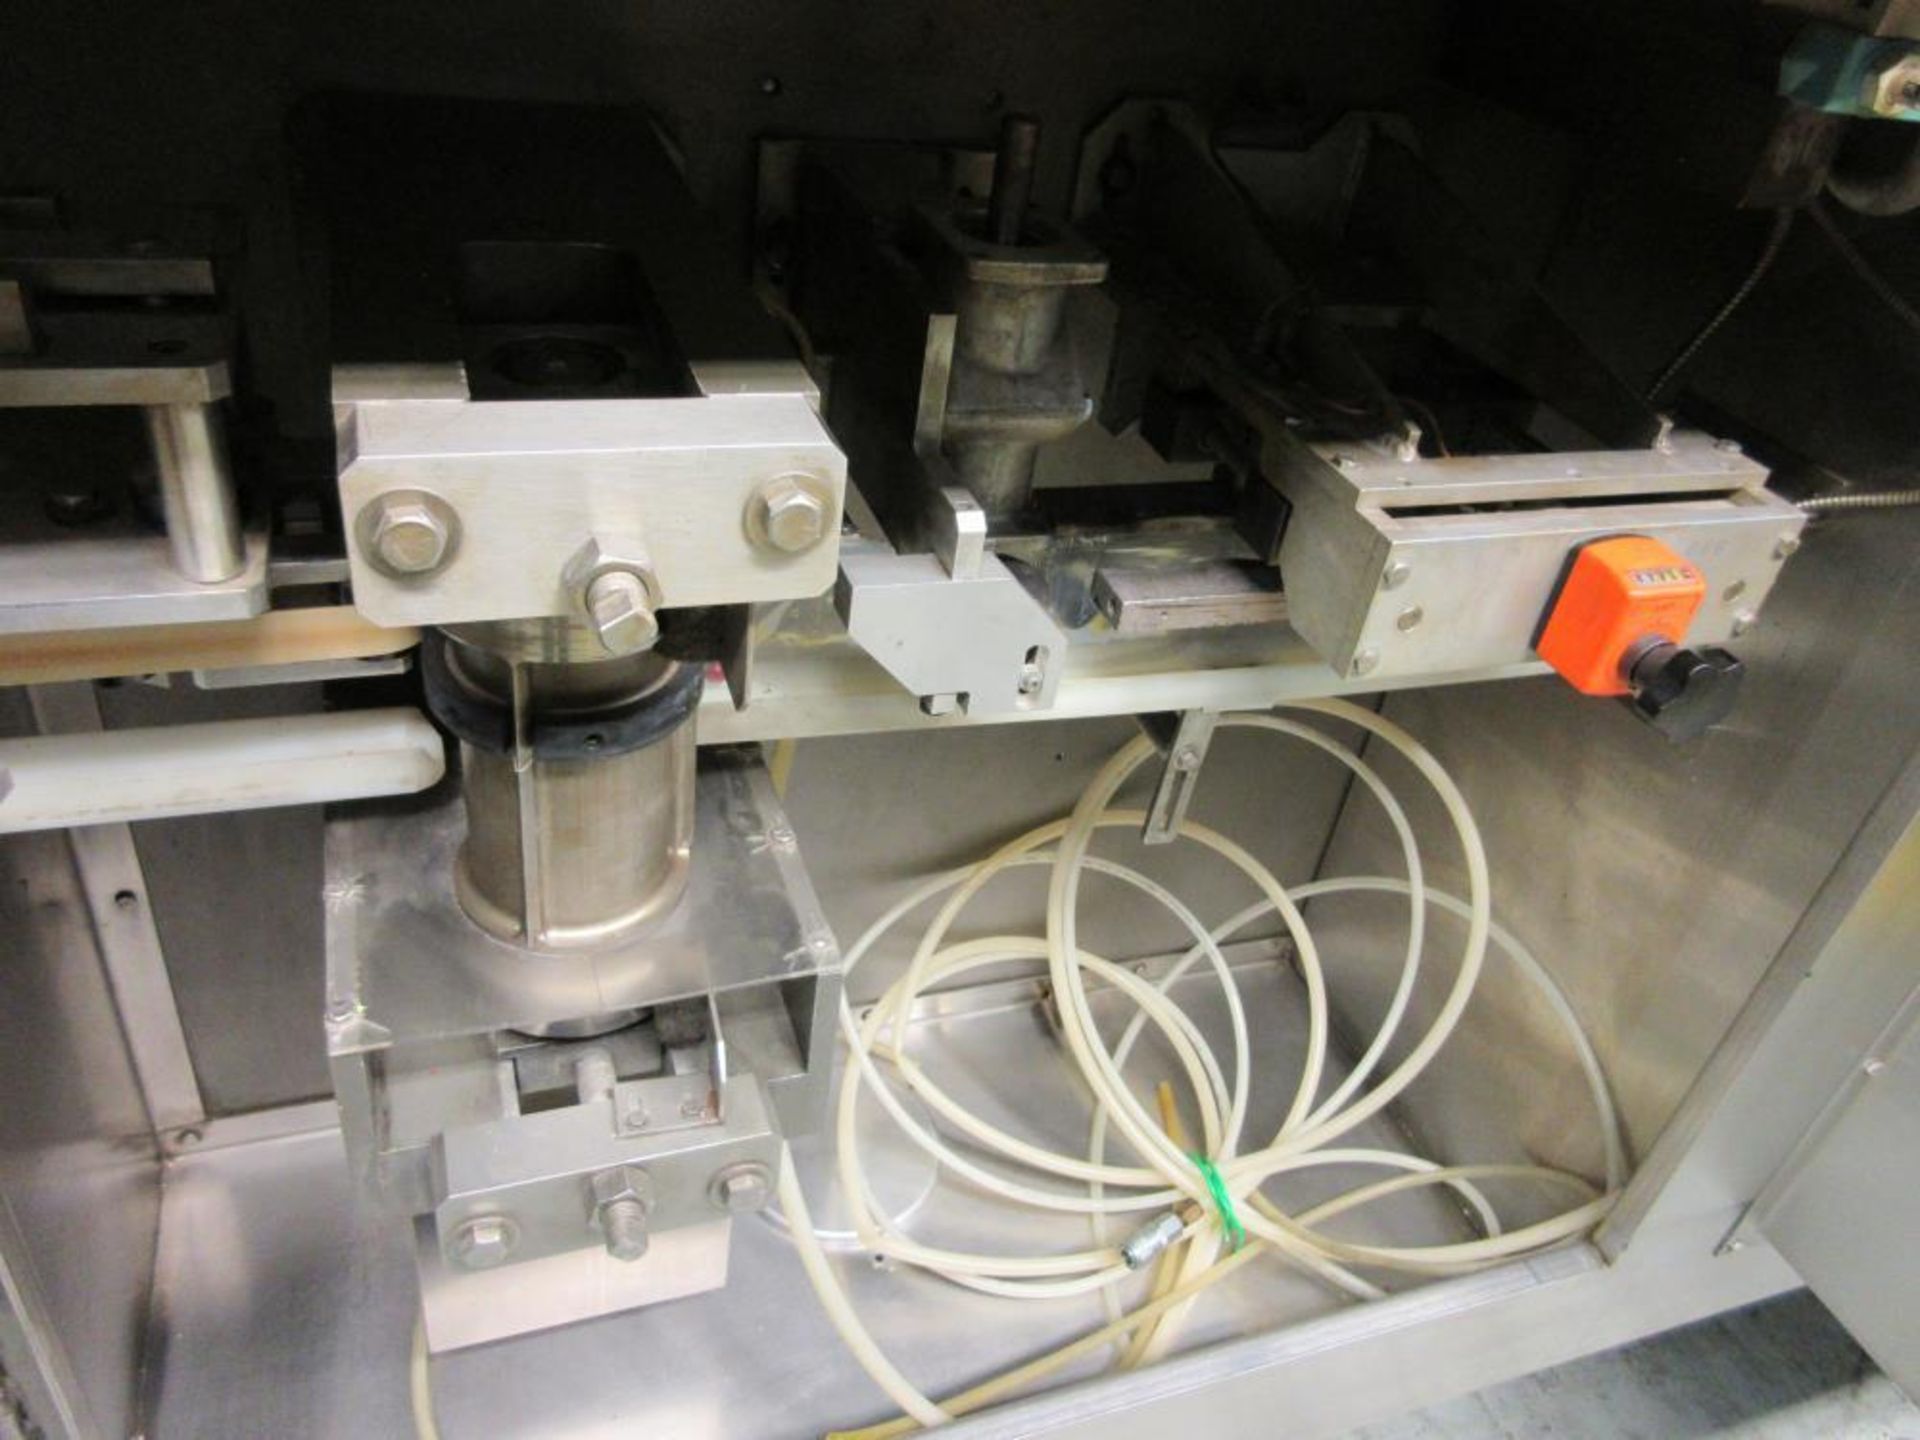 Ropak Model V High-Speed Rotary Pouch Machine with Volumetric Screw Product Feeder - Image 21 of 30